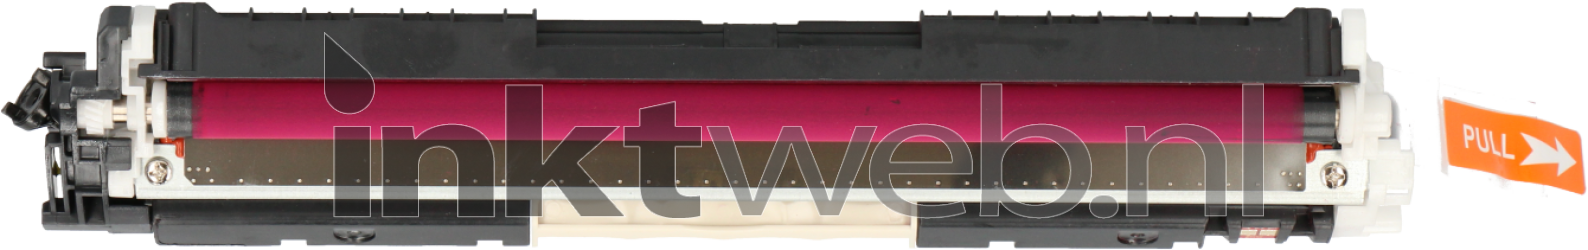 FLWR HP 130A magenta Product only